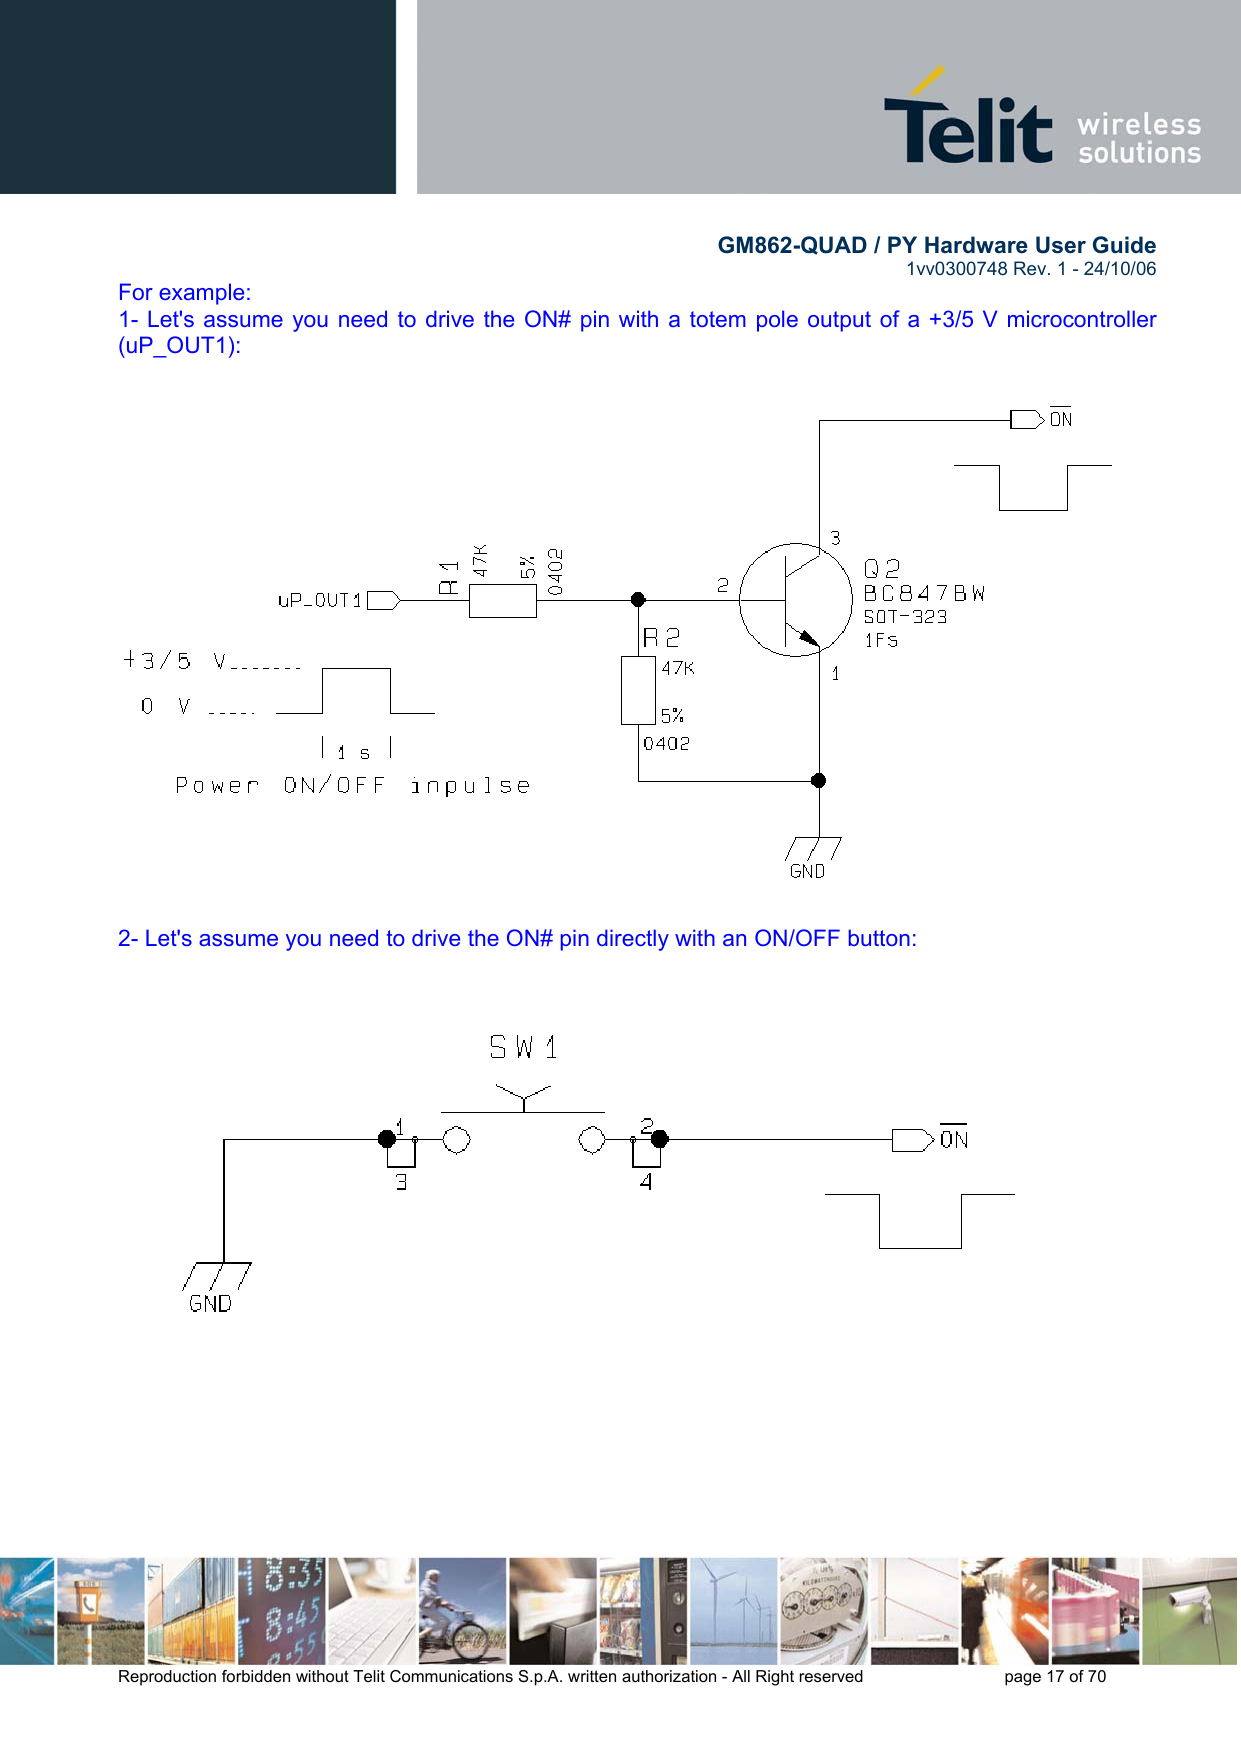        GM862-QUAD / PY Hardware User Guide   1vv0300748 Rev. 1 - 24/10/06    Reproduction forbidden without Telit Communications S.p.A. written authorization - All Right reserved    page 17 of 70  For example: 1- Let&apos;s assume you need to drive the ON# pin with a totem pole output of a +3/5 V microcontroller (uP_OUT1):   2- Let&apos;s assume you need to drive the ON# pin directly with an ON/OFF button:    